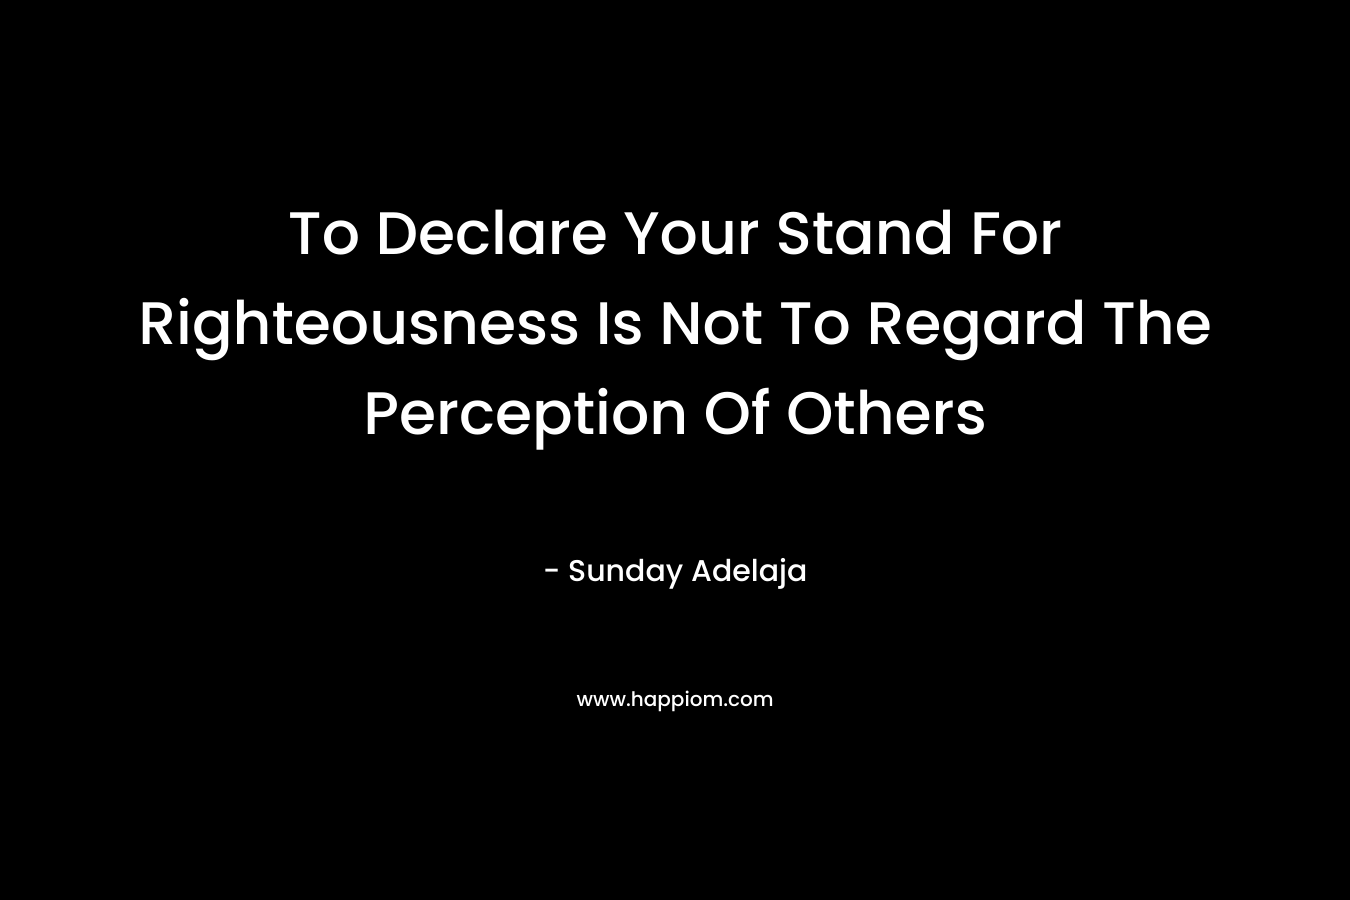 To Declare Your Stand For Righteousness Is Not To Regard The Perception Of Others – Sunday Adelaja